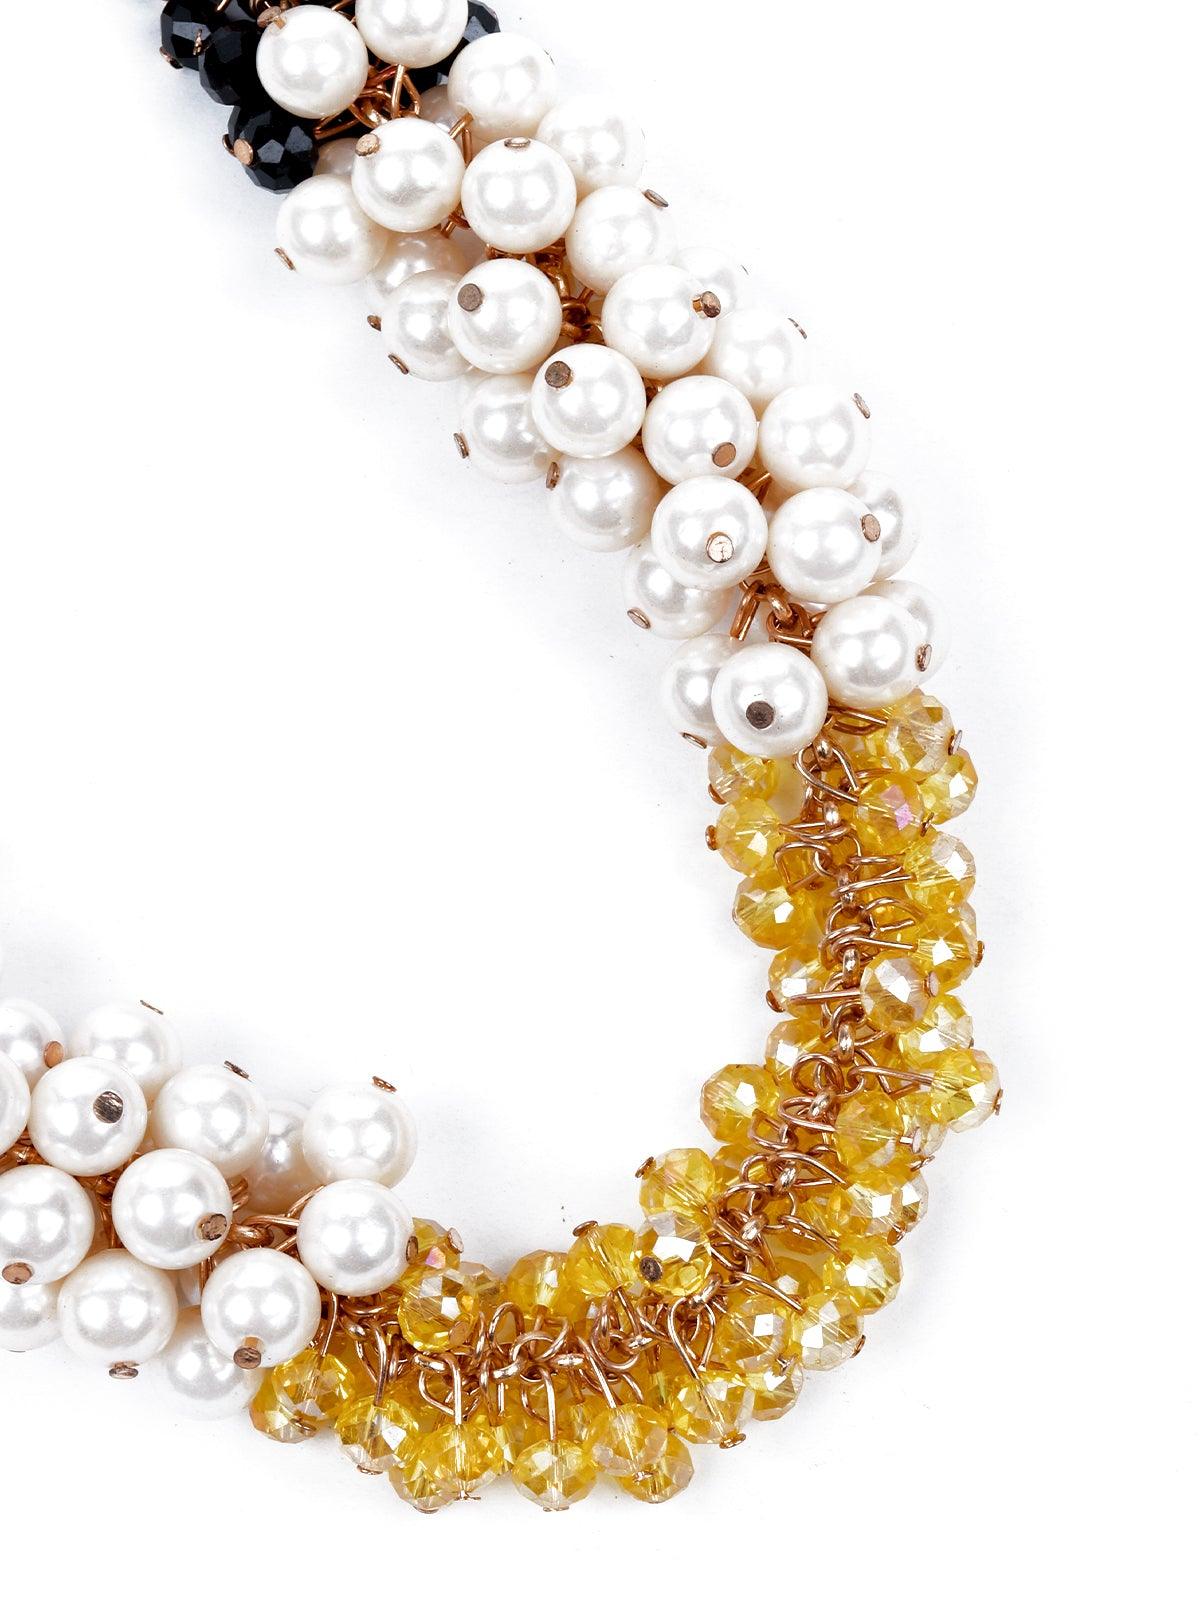 Clustered Multicolour Beaded Statement Necklace. - Odette